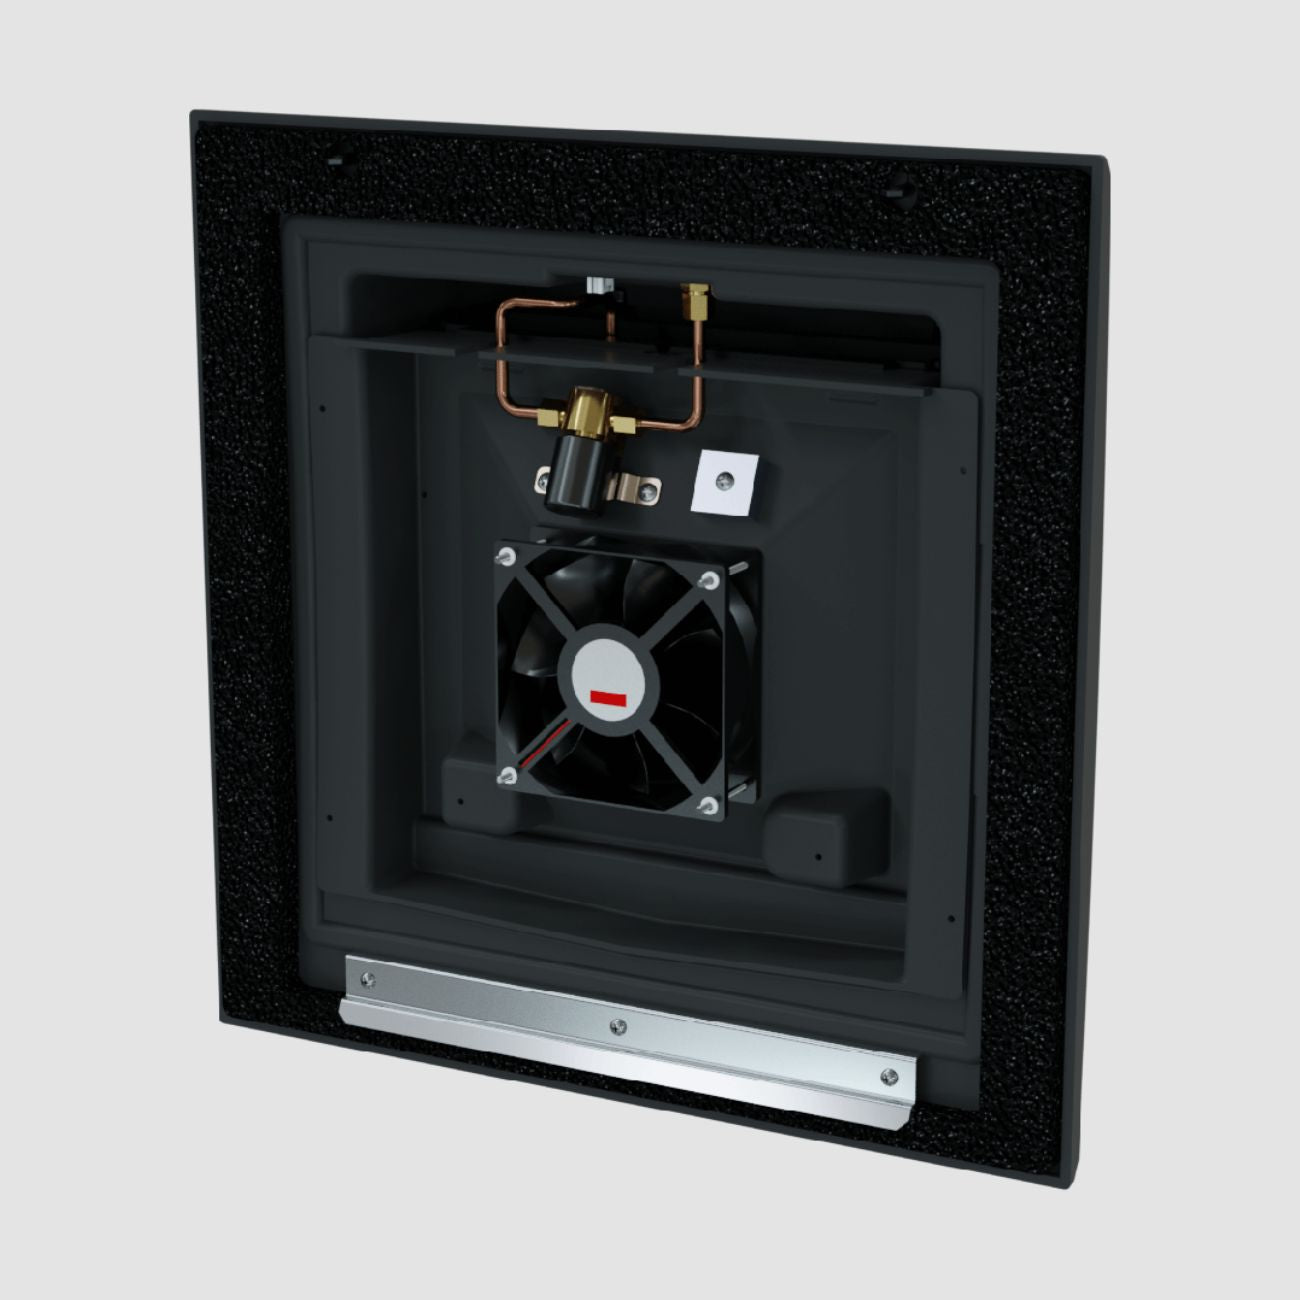 Integrated humidifier inside - WINE GUARDIAN D200 DUCTED Cooling Unit - 60HZ